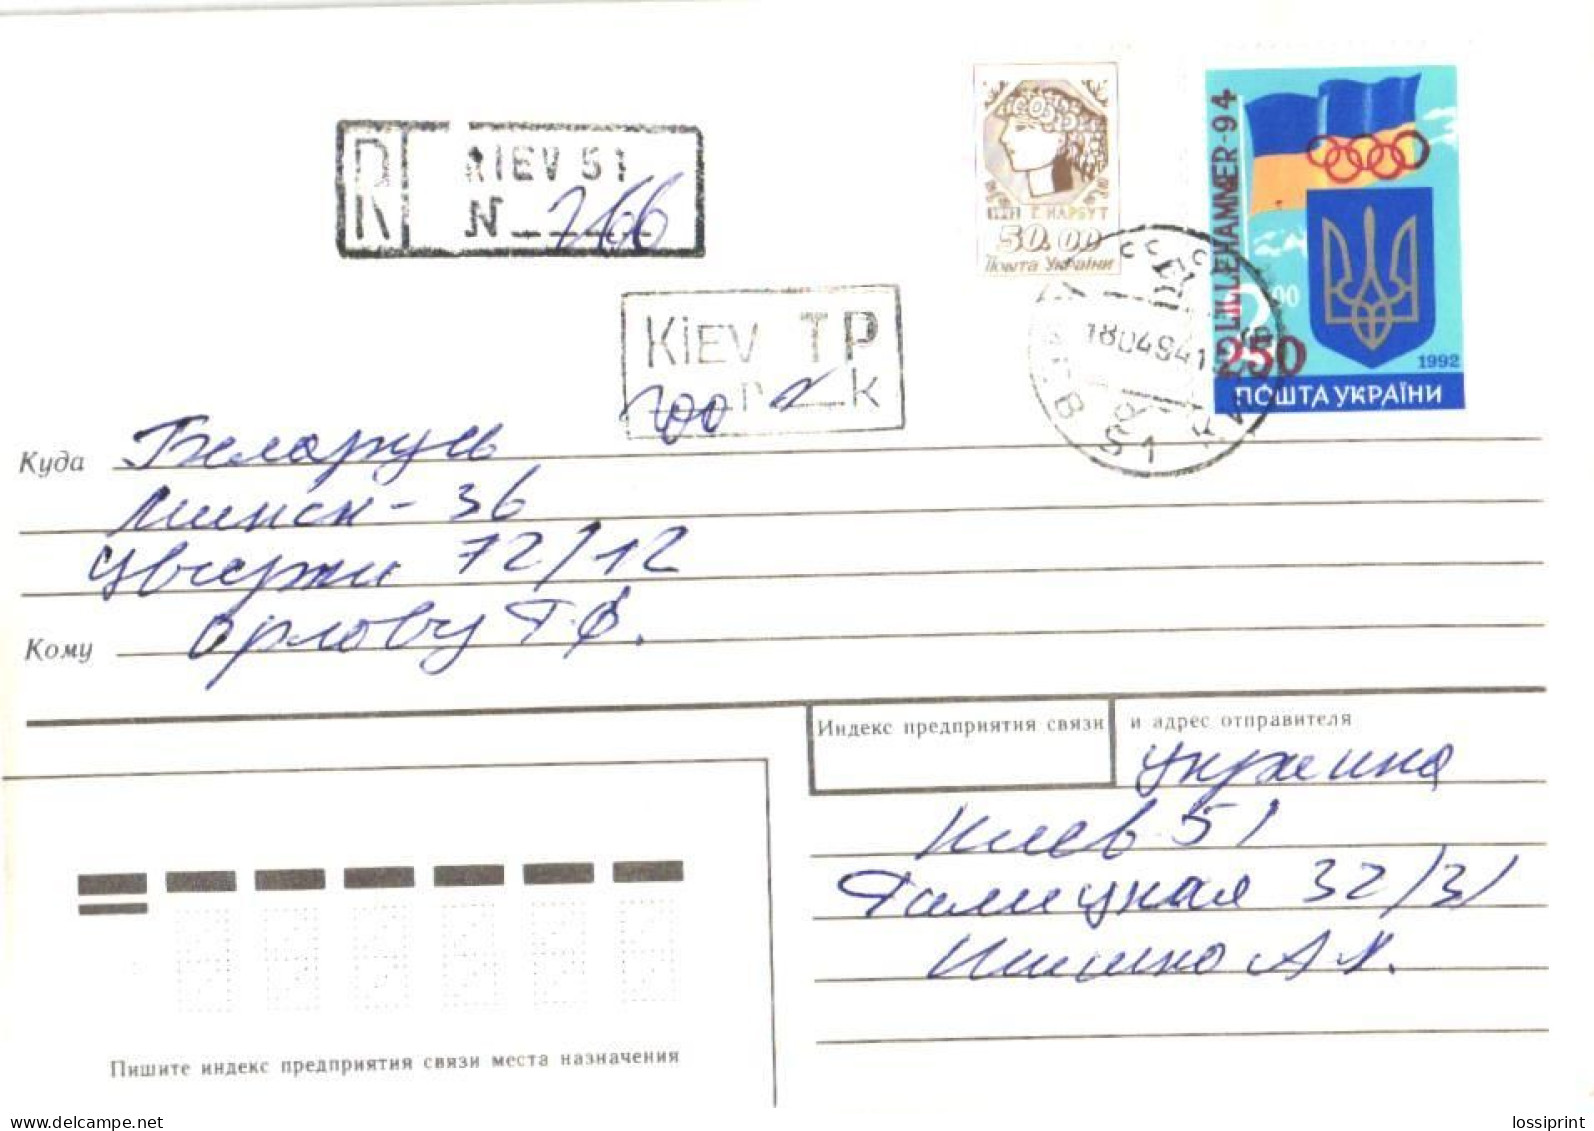 Ukraine:Ukraina:Registered Letter From Kiev 51 With Overprinted Stamp Lillehammer, Surcharge Cancellation, 1994 - Ucrania